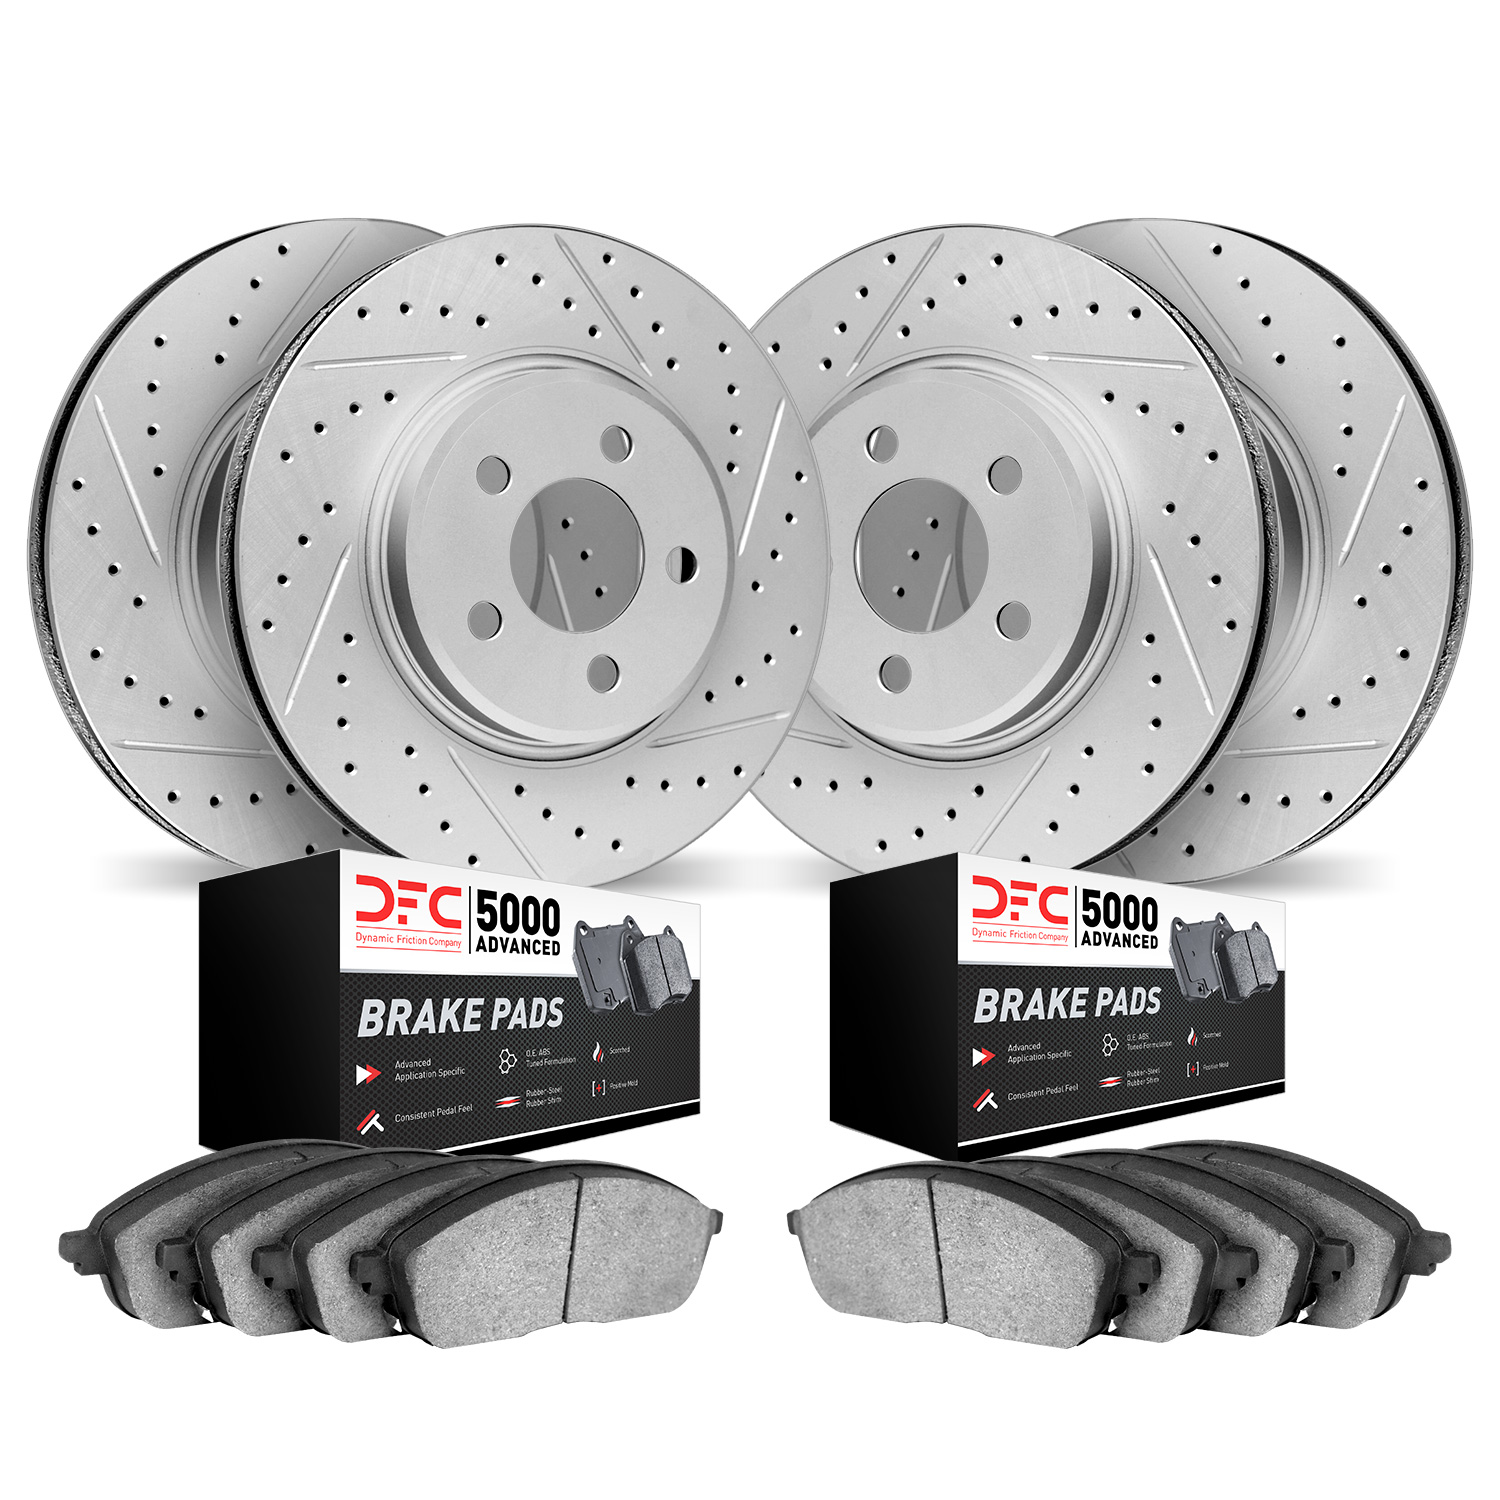 2504-20004 Geoperformance Drilled/Slotted Rotors w/5000 Advanced Brake Pads Kit, 2013-2015 Jaguar, Position: Front and Rear